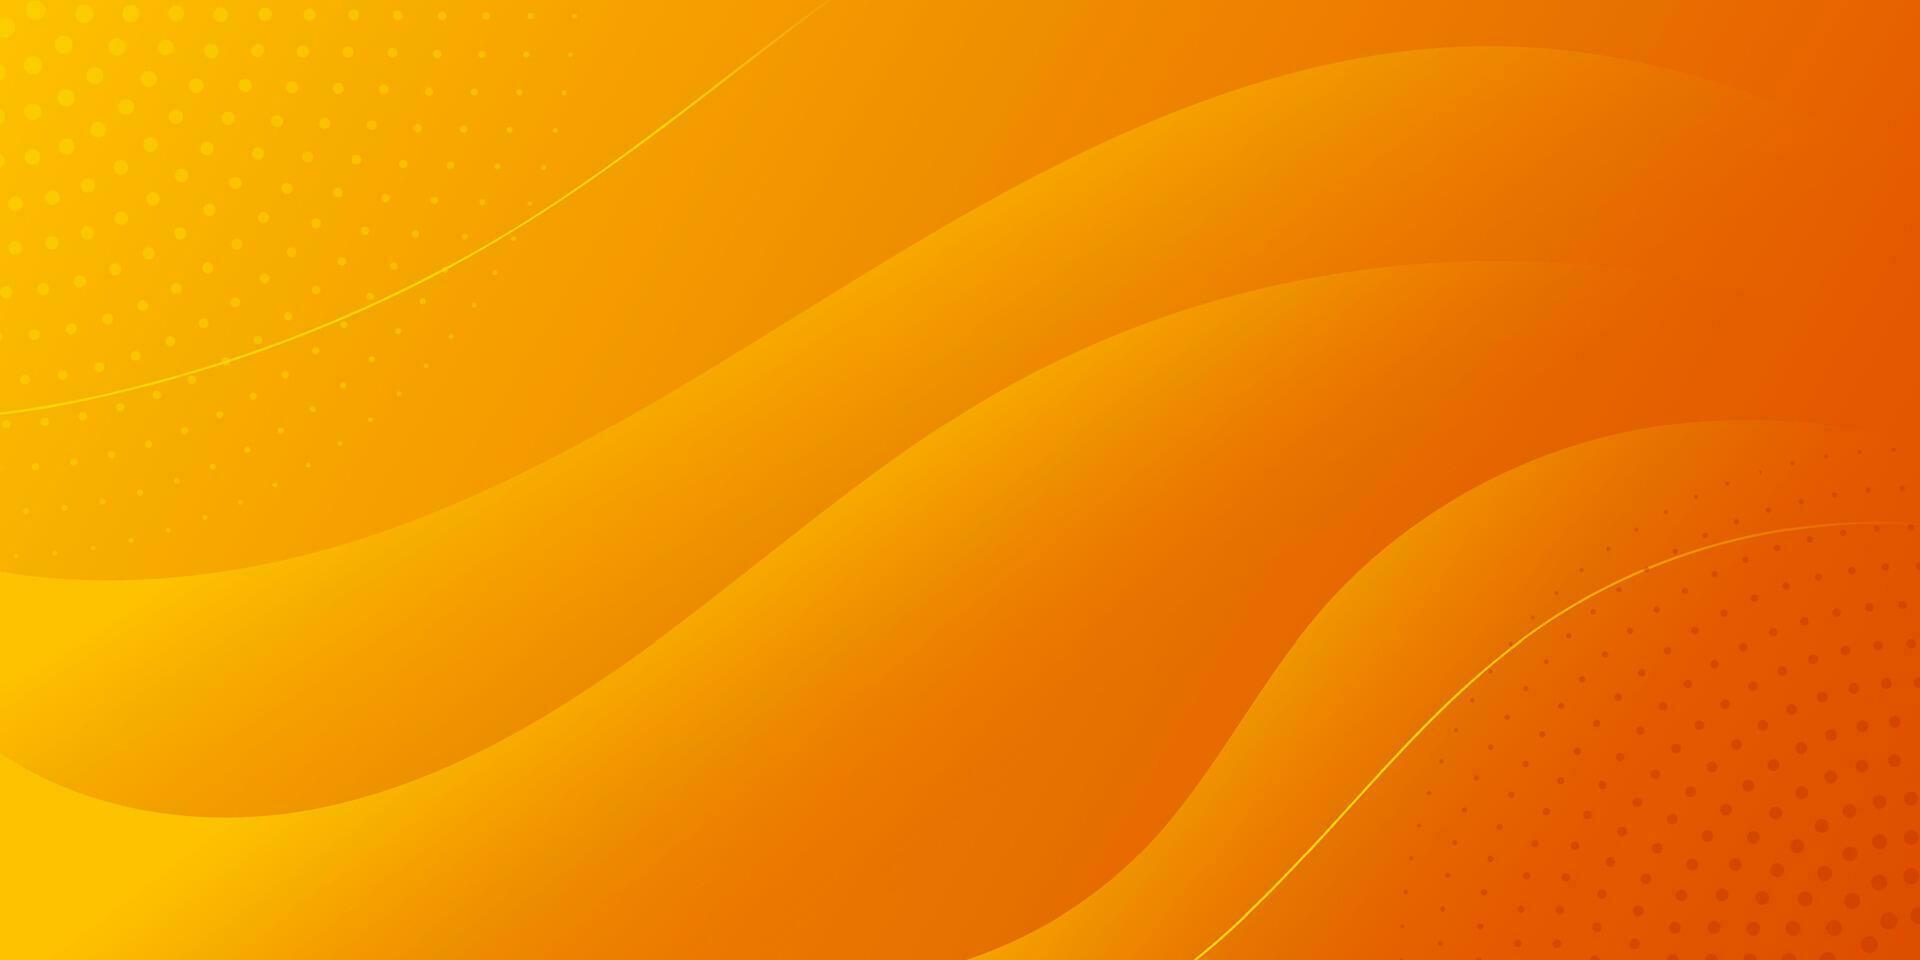 Orange gradient background with dynamic abstract shapes. Vector illustration